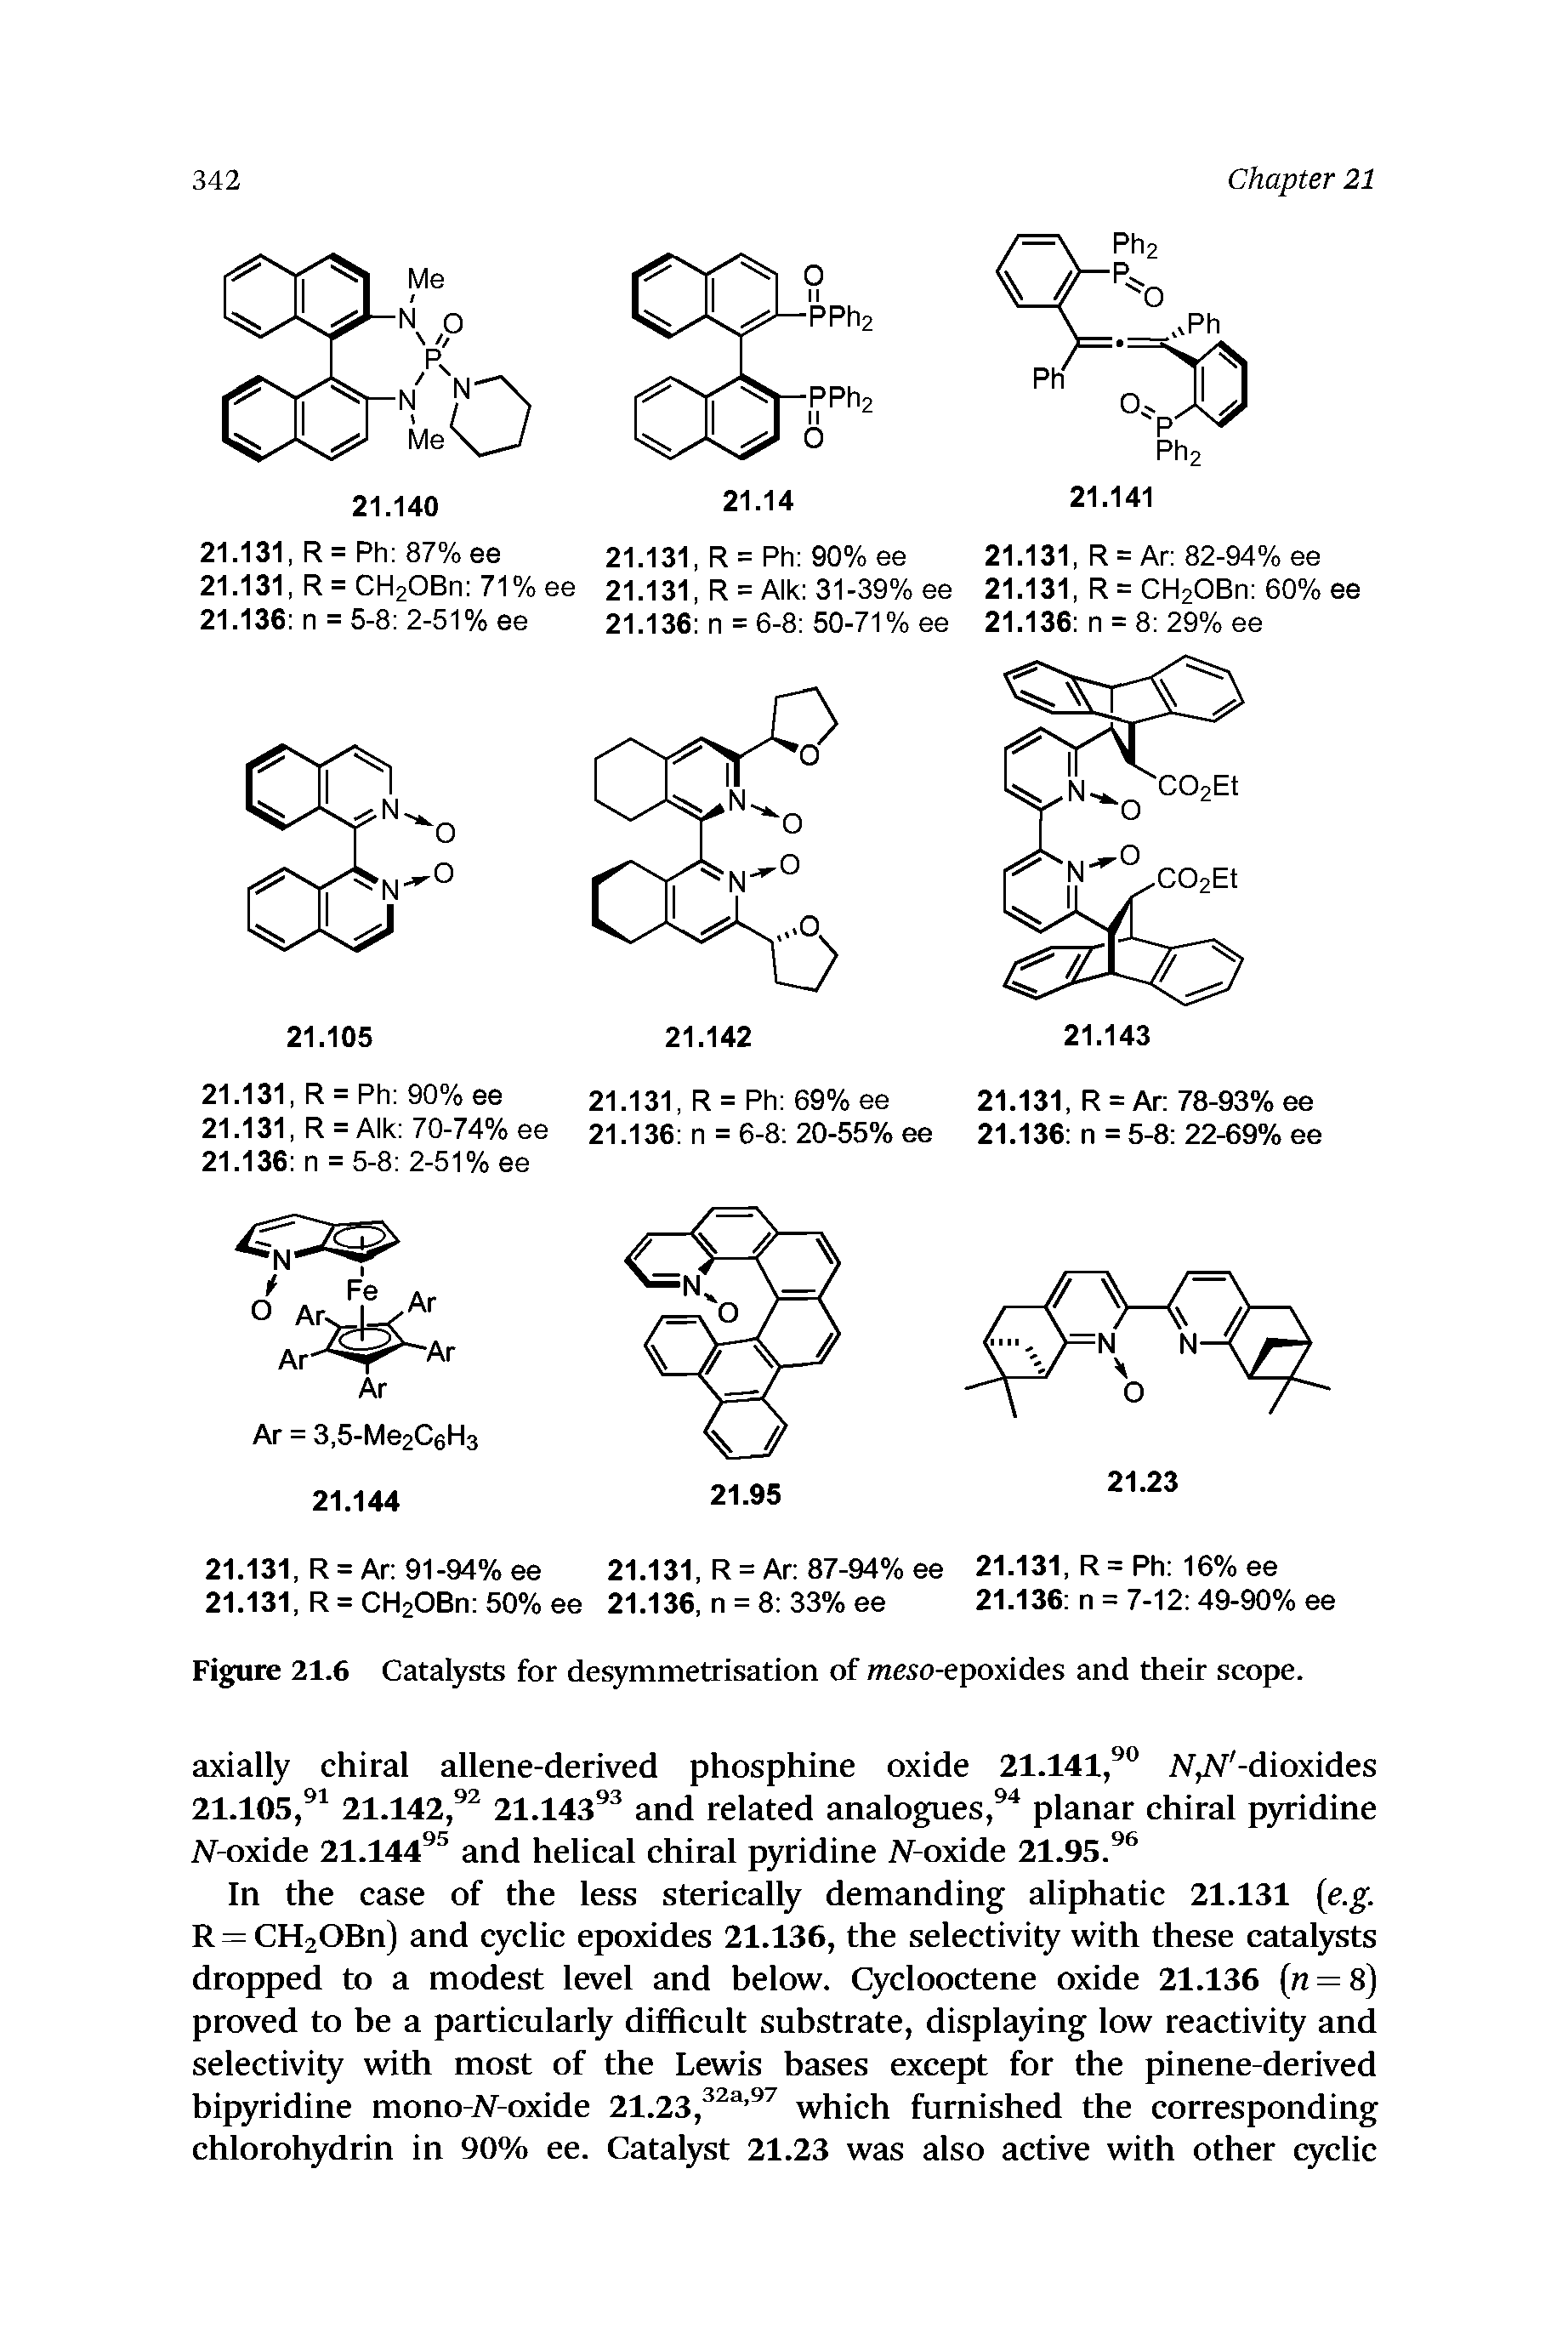 Figure 21.6 Catalysts for desymmetrisation of meso-epoxides and their scope.